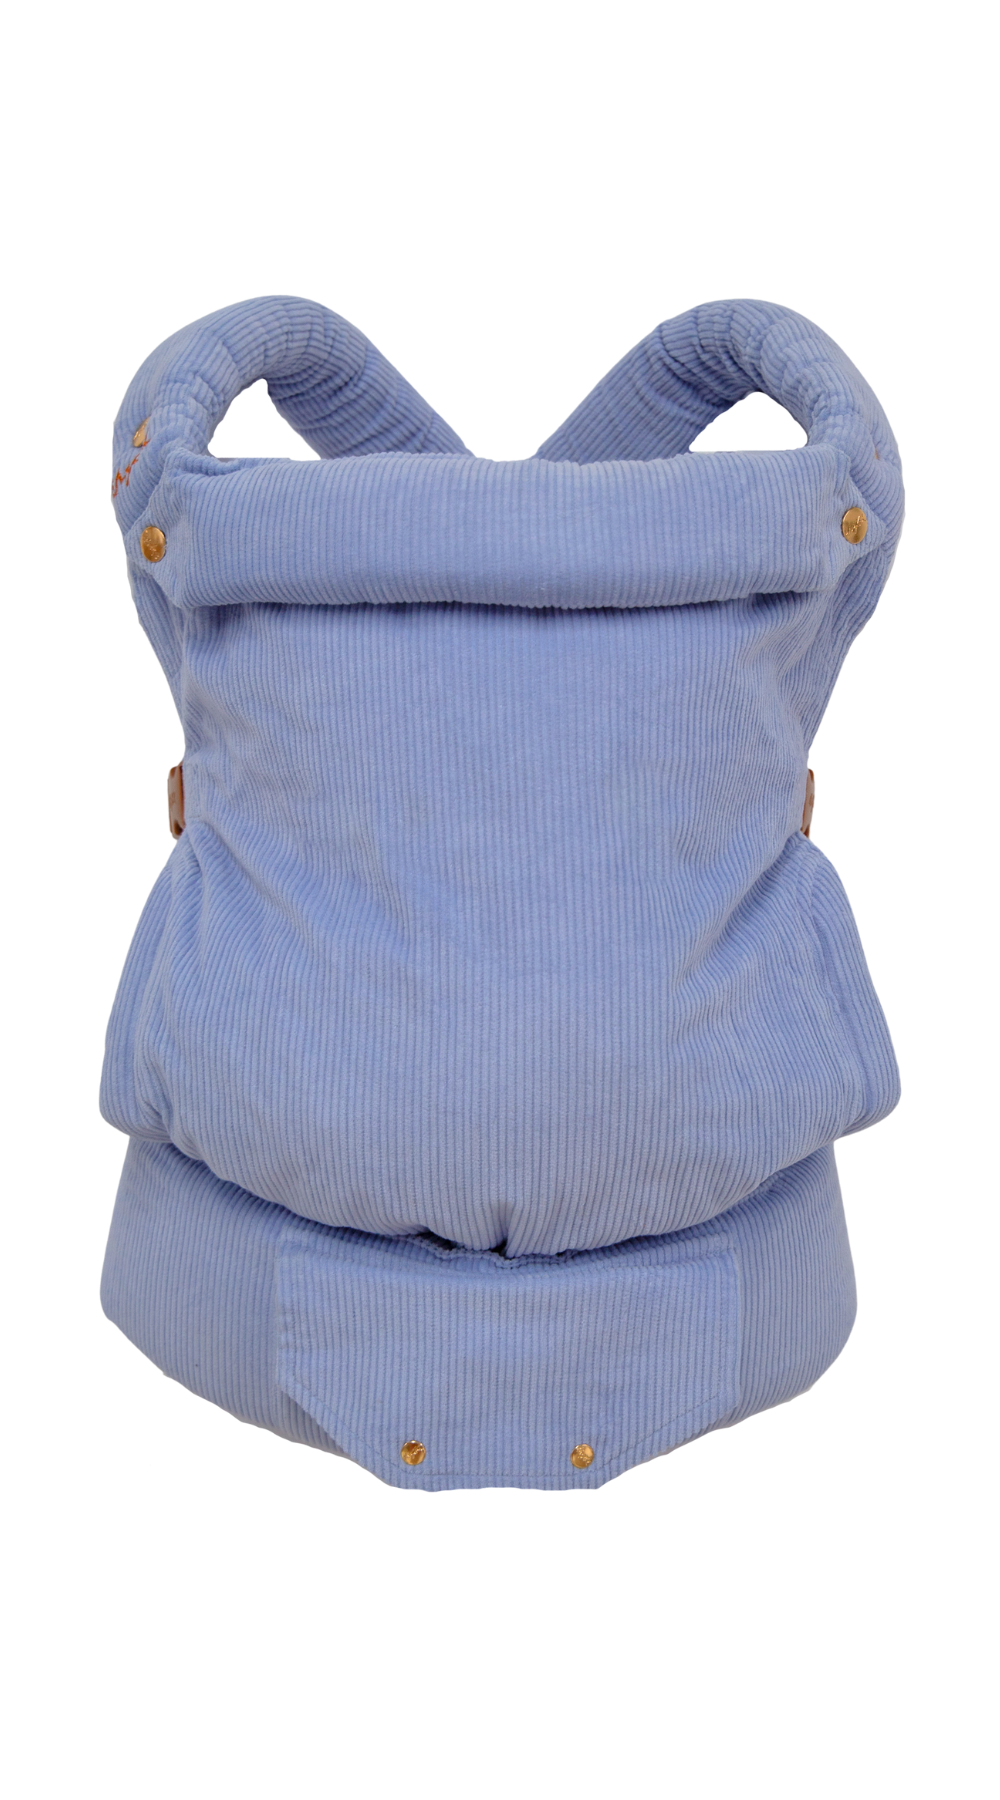 pink and blue chekoh baby carrier - cornflour blue corduroy cord fabric perfect from newborn up to toddler